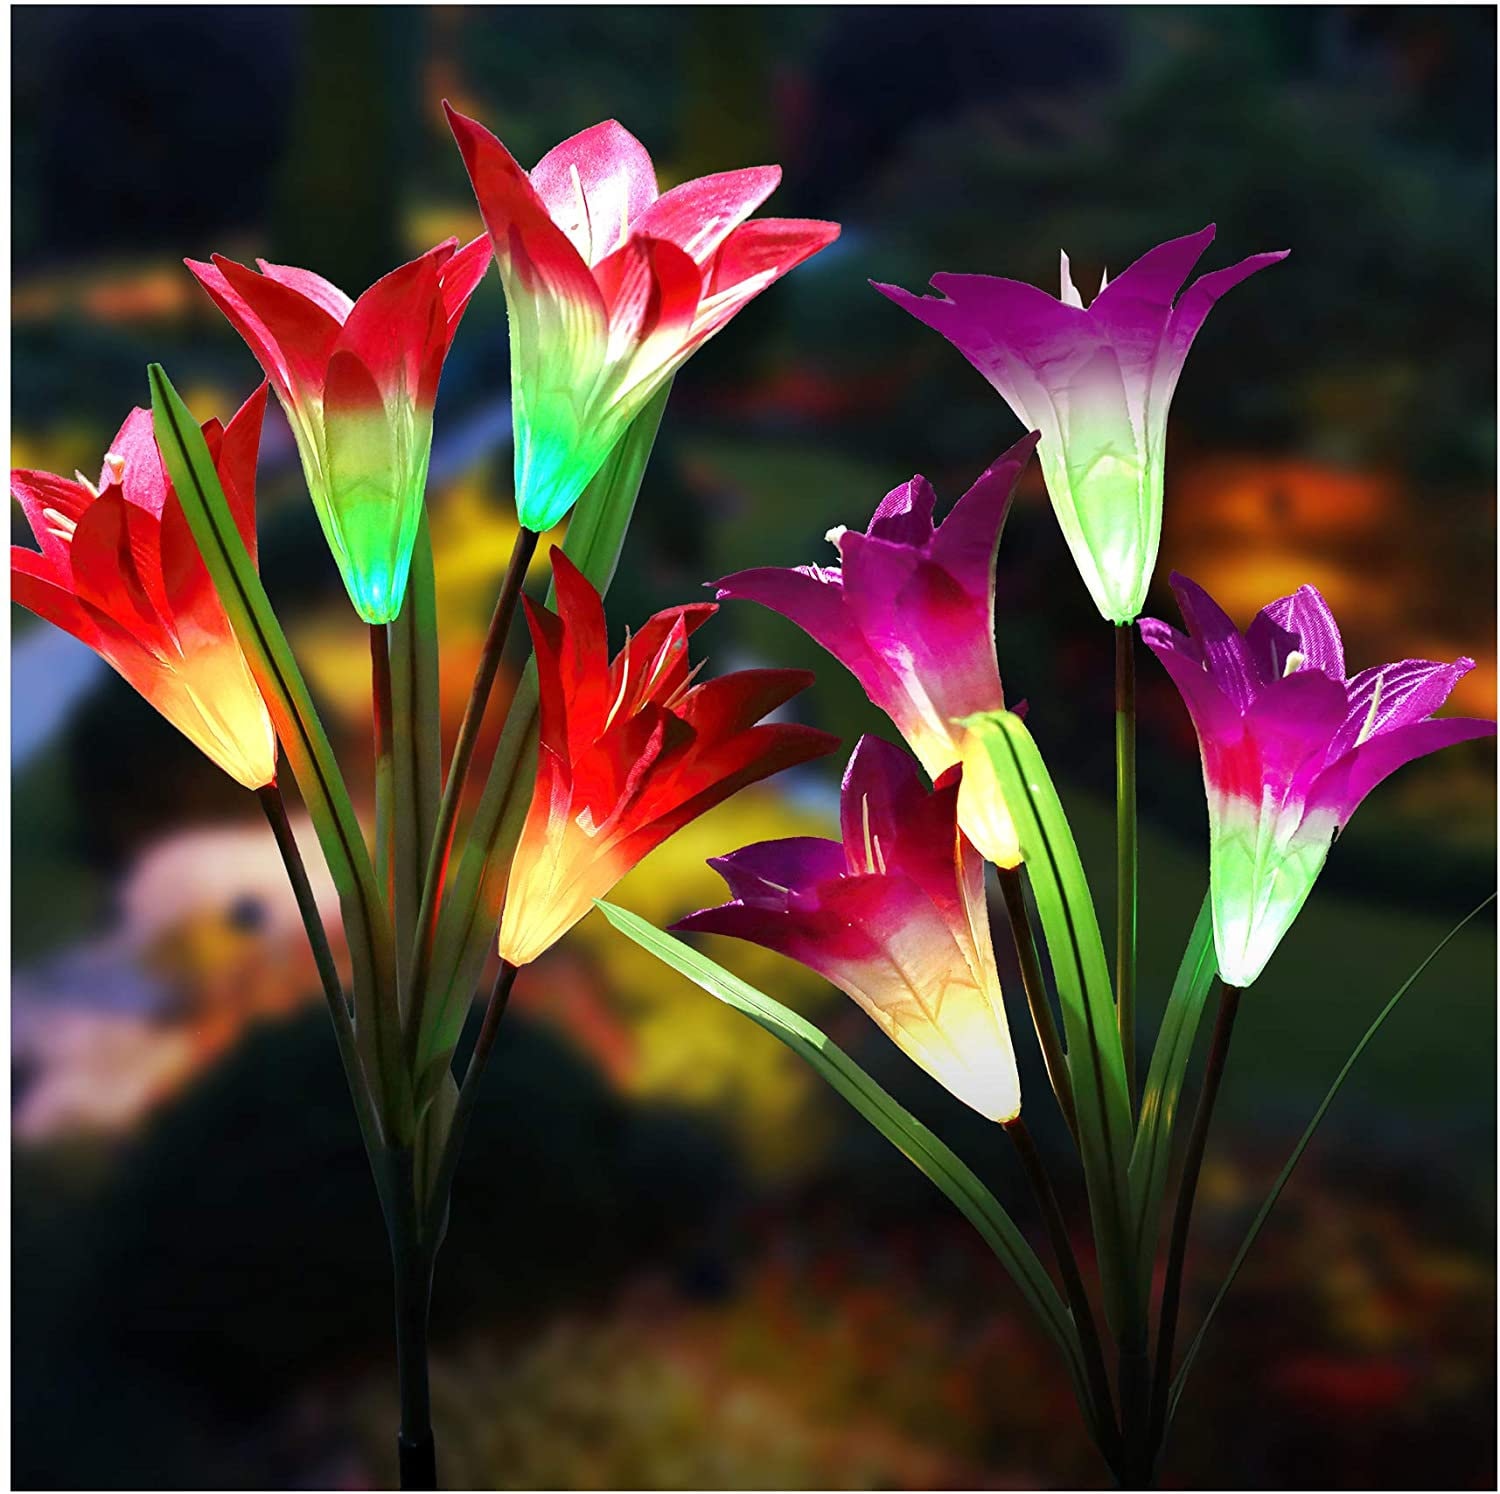 Summer Sale-Solar garden LED lights - Color changing, Light up lily flower lights Gift (Red and Pink)&(White and Blue)